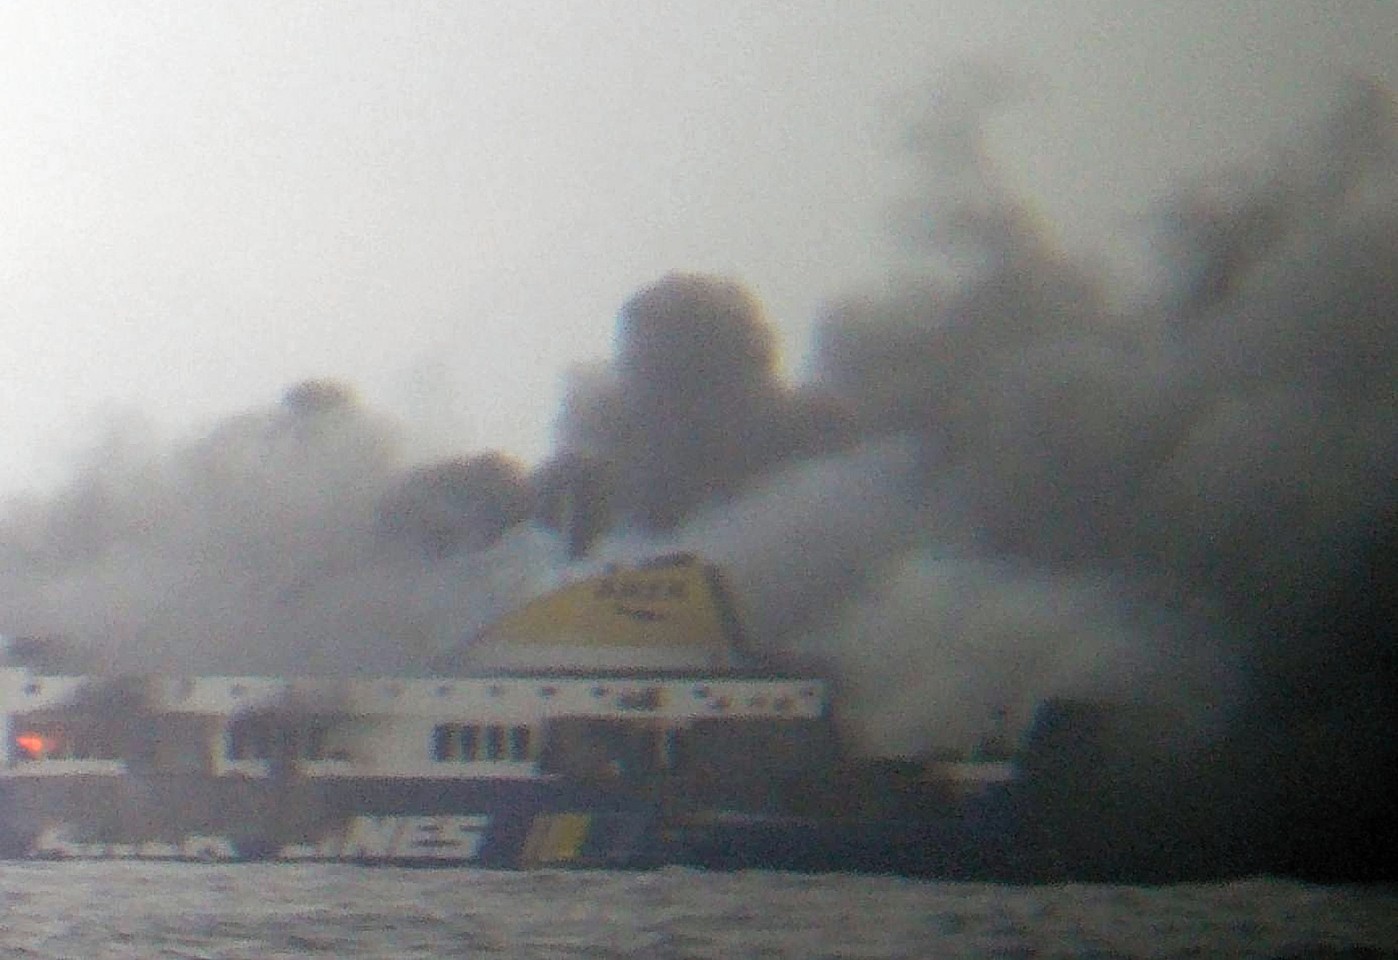 The Italian ferry, surrounded by smoke